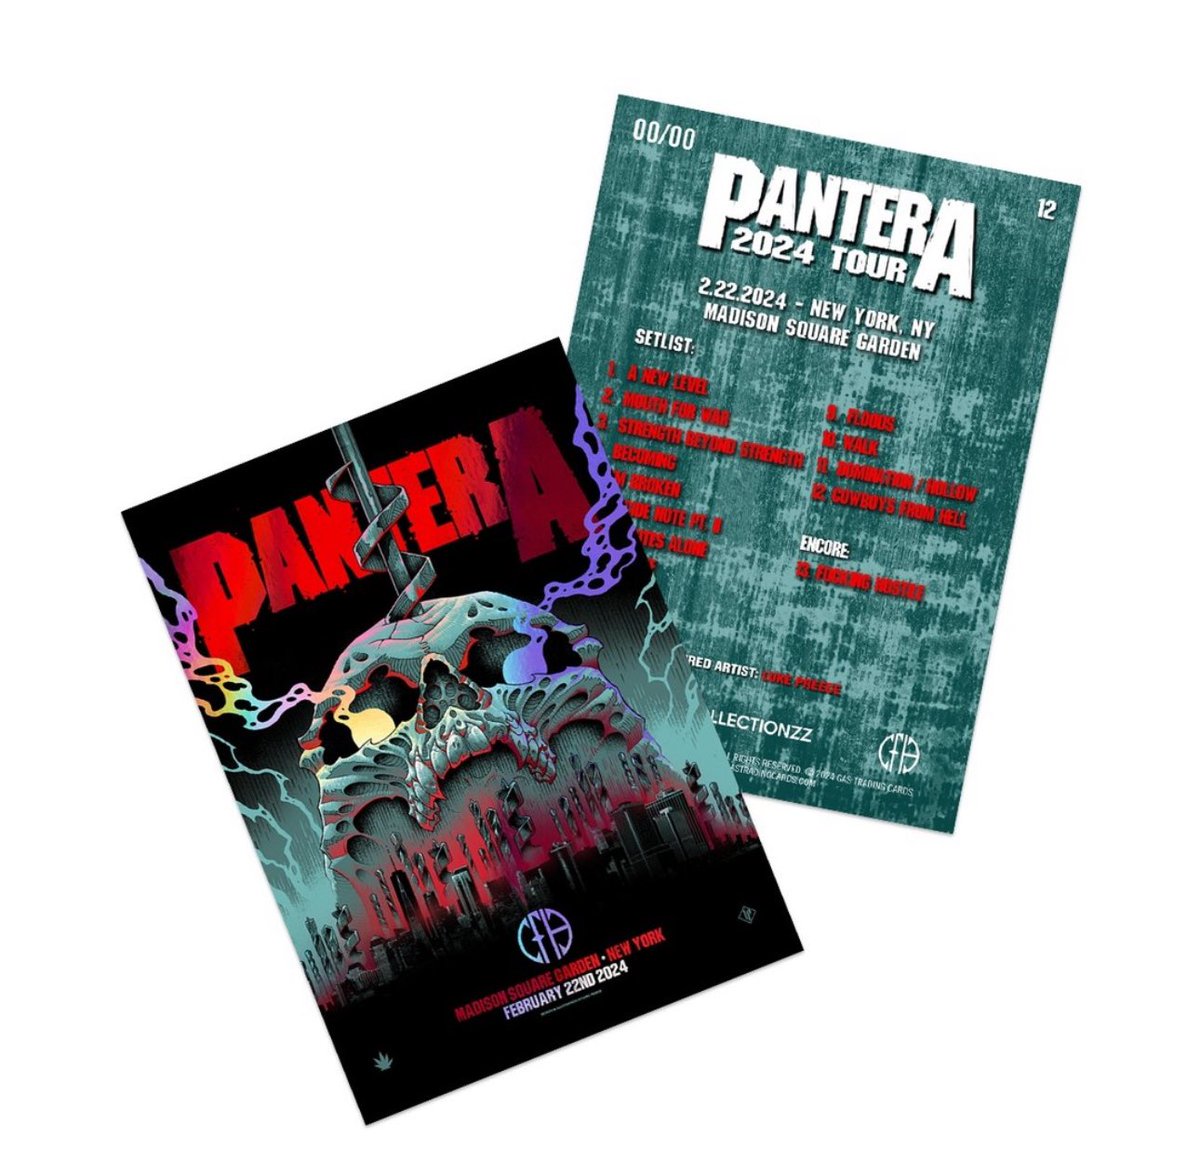 The @Pantera 2024 Tour Foil Trading Card Complete Set is now available on iconic.collectionzz.com This 15 piece set of premium holographic foil trading cards comes in a sealed case and a #GAS holographic sticker of authenticity adhered.